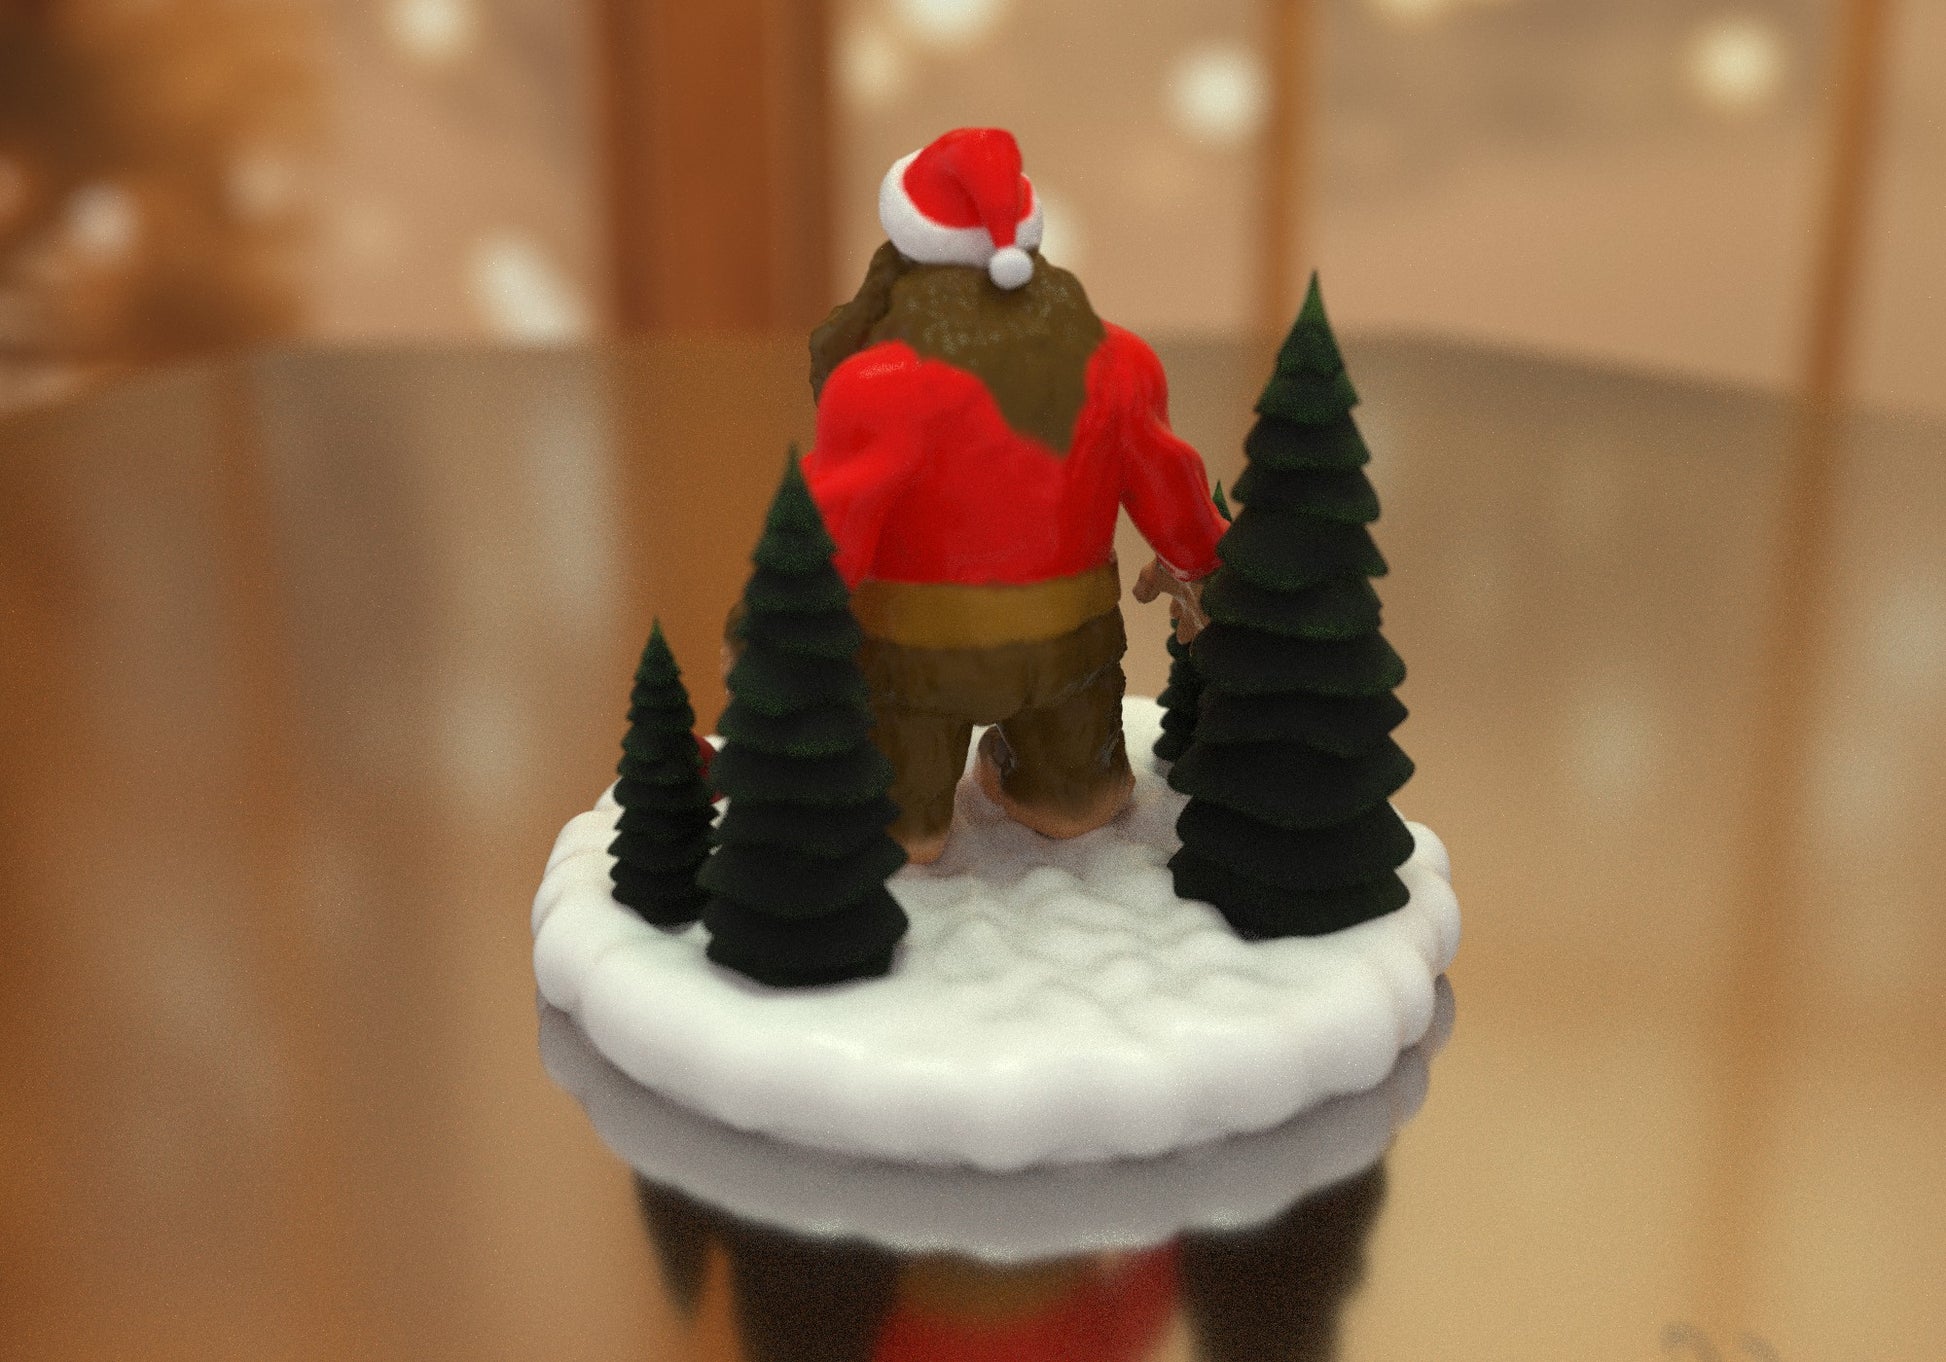 a figurine of a man in a santa hat on a table